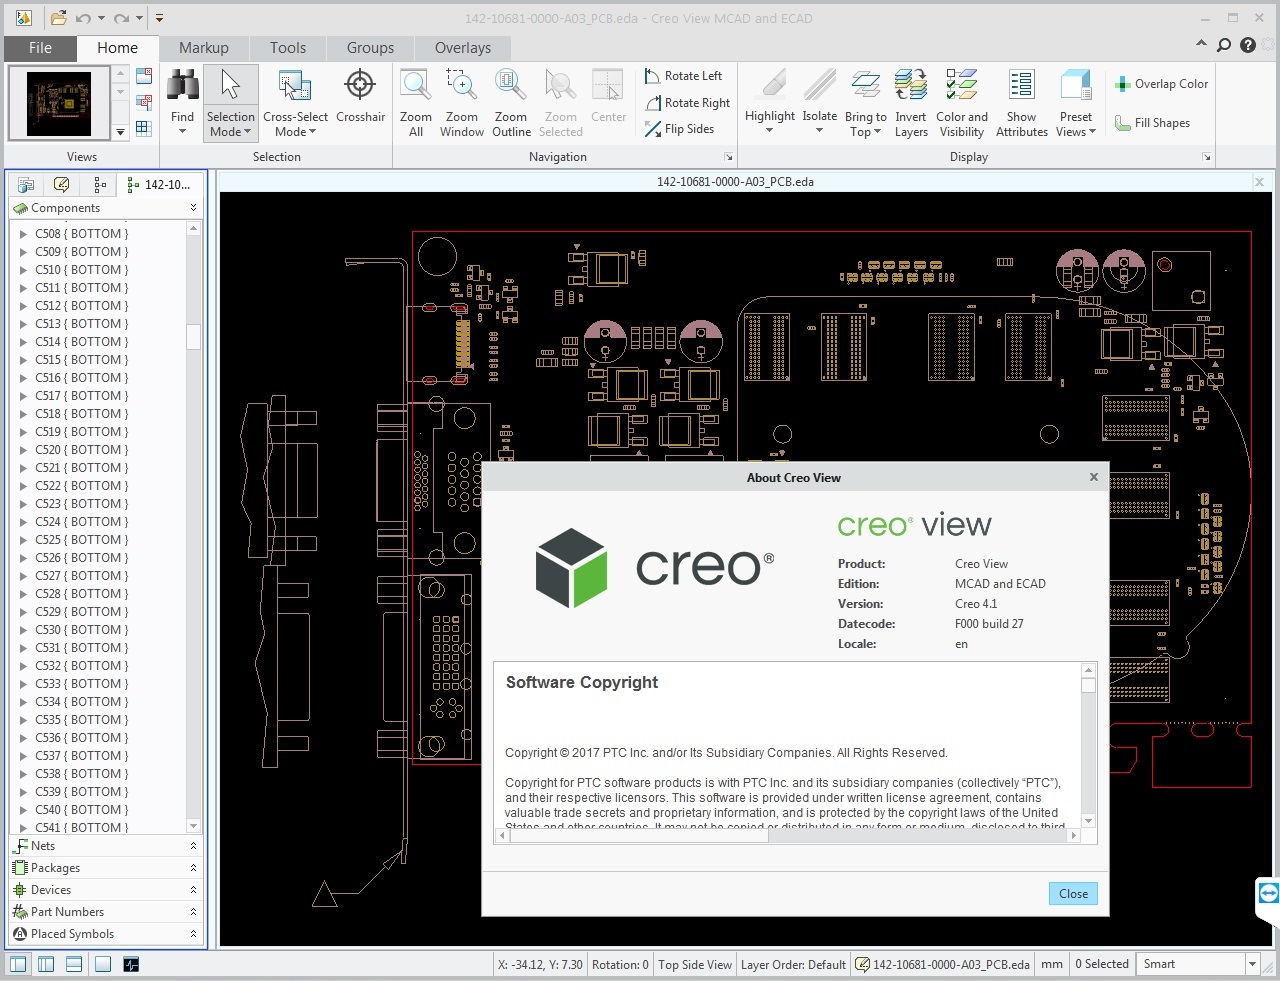 Working with PTC Creo View 4.1 F000 full license